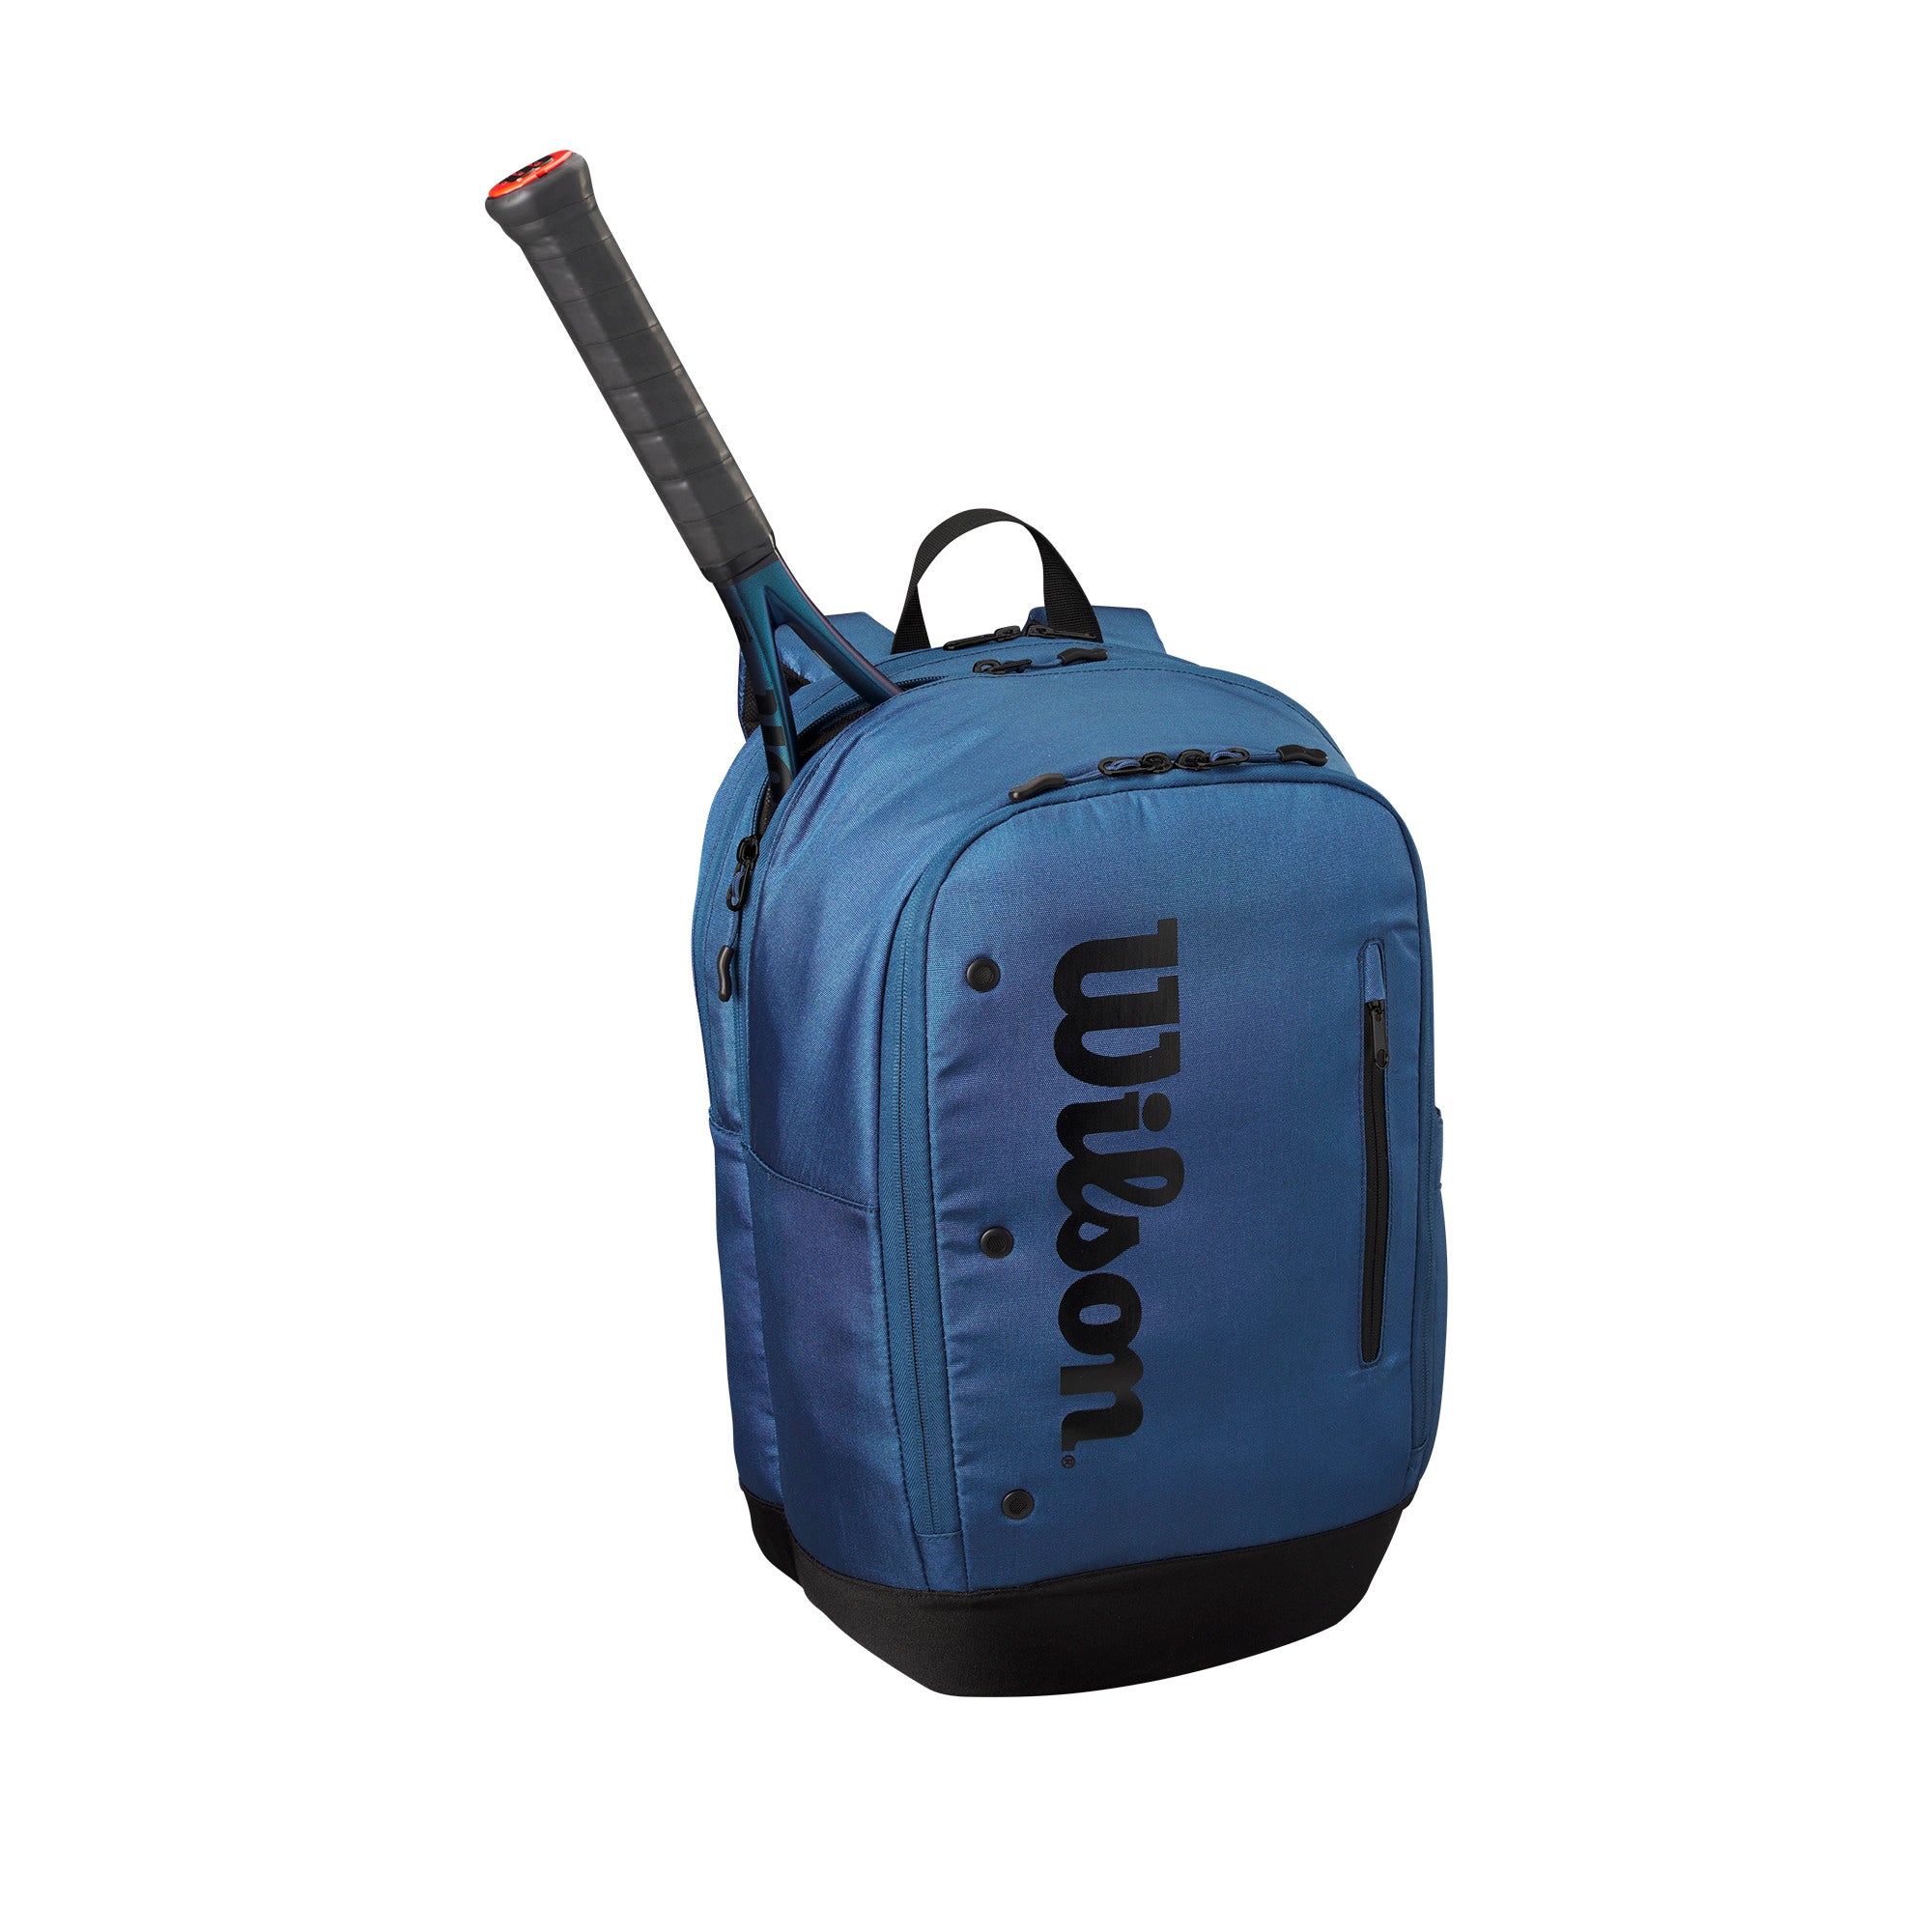 Wilson Tour Ultra Backpack in Blue